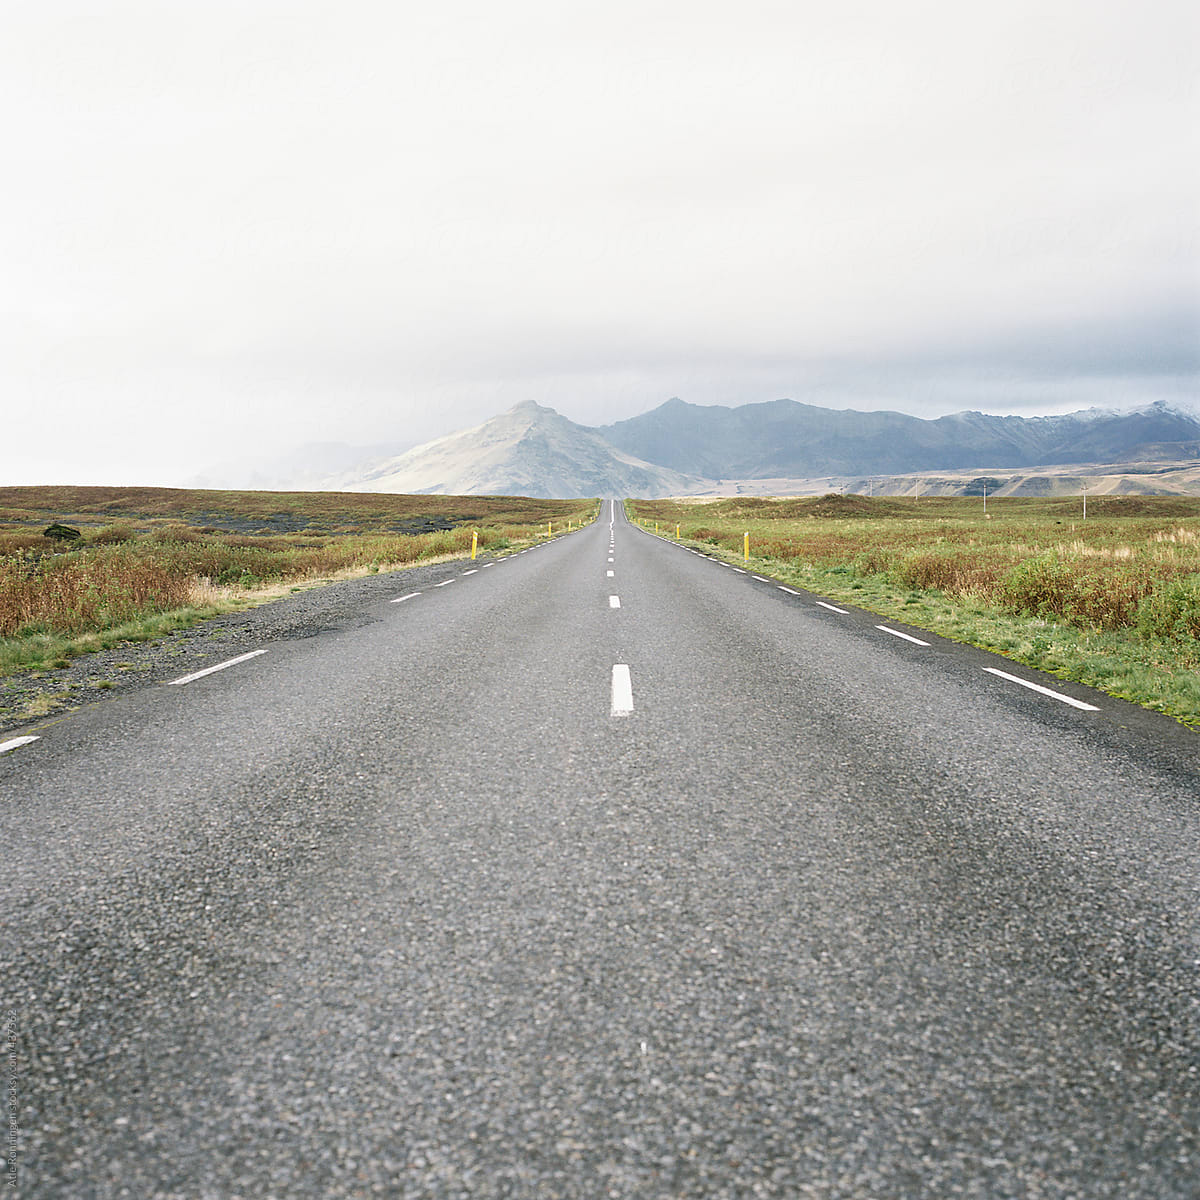 Road perspective trough the beautiful Icelandic landscape with mountains in far distance